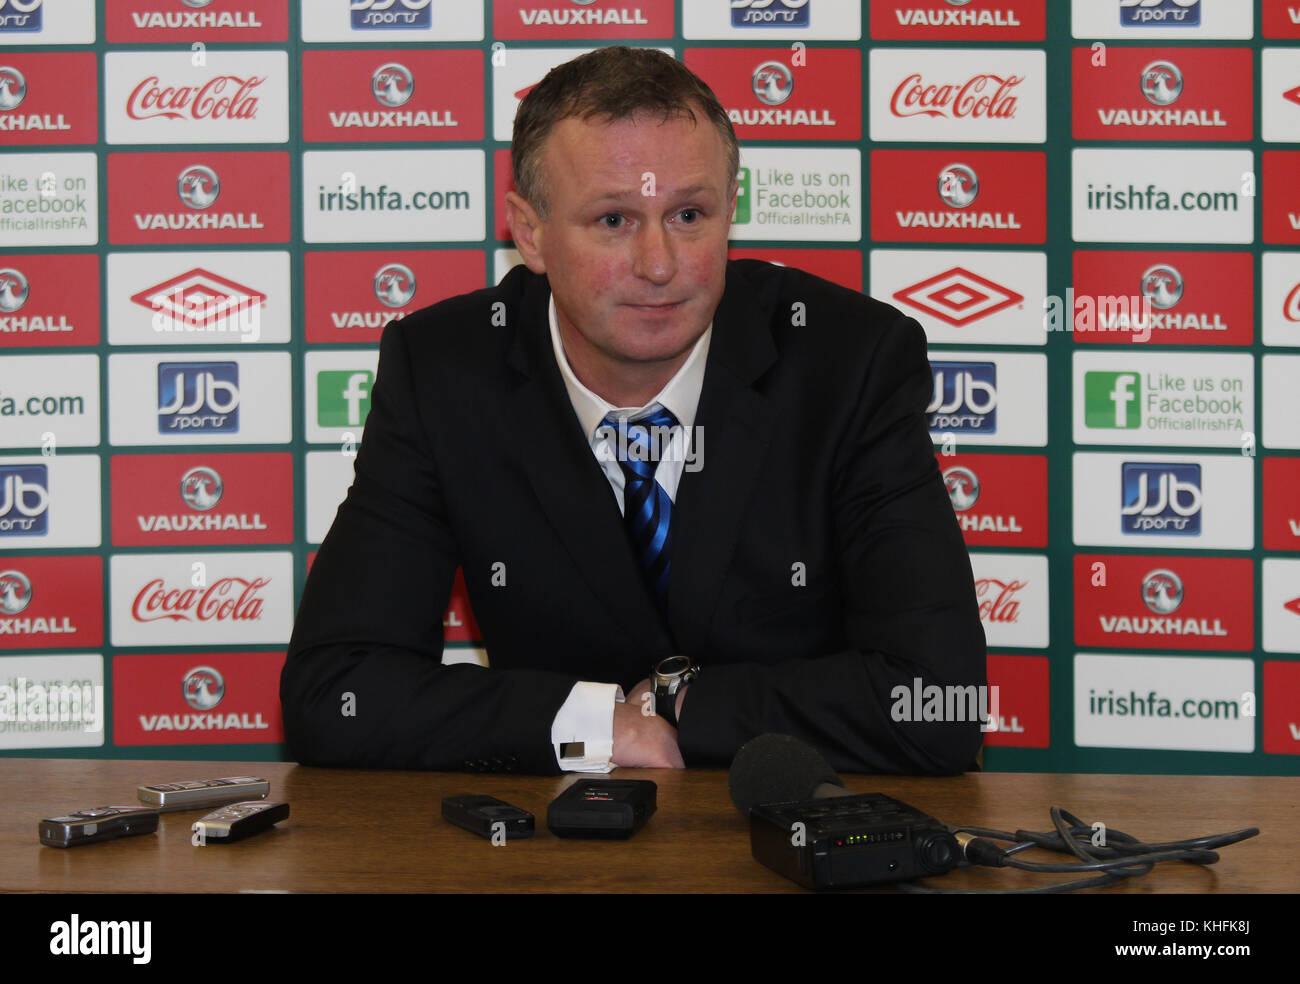 Michael O'Neill's first game in charge of Northern Ireland. O'Neill succeeded Nigel Worthington and his first game was at home to Norway on 29 February 2012 at Windsor Park Belfast. ONeill reflects on his first game incharge - a defeat - in the post-match press conference. Stock Photo